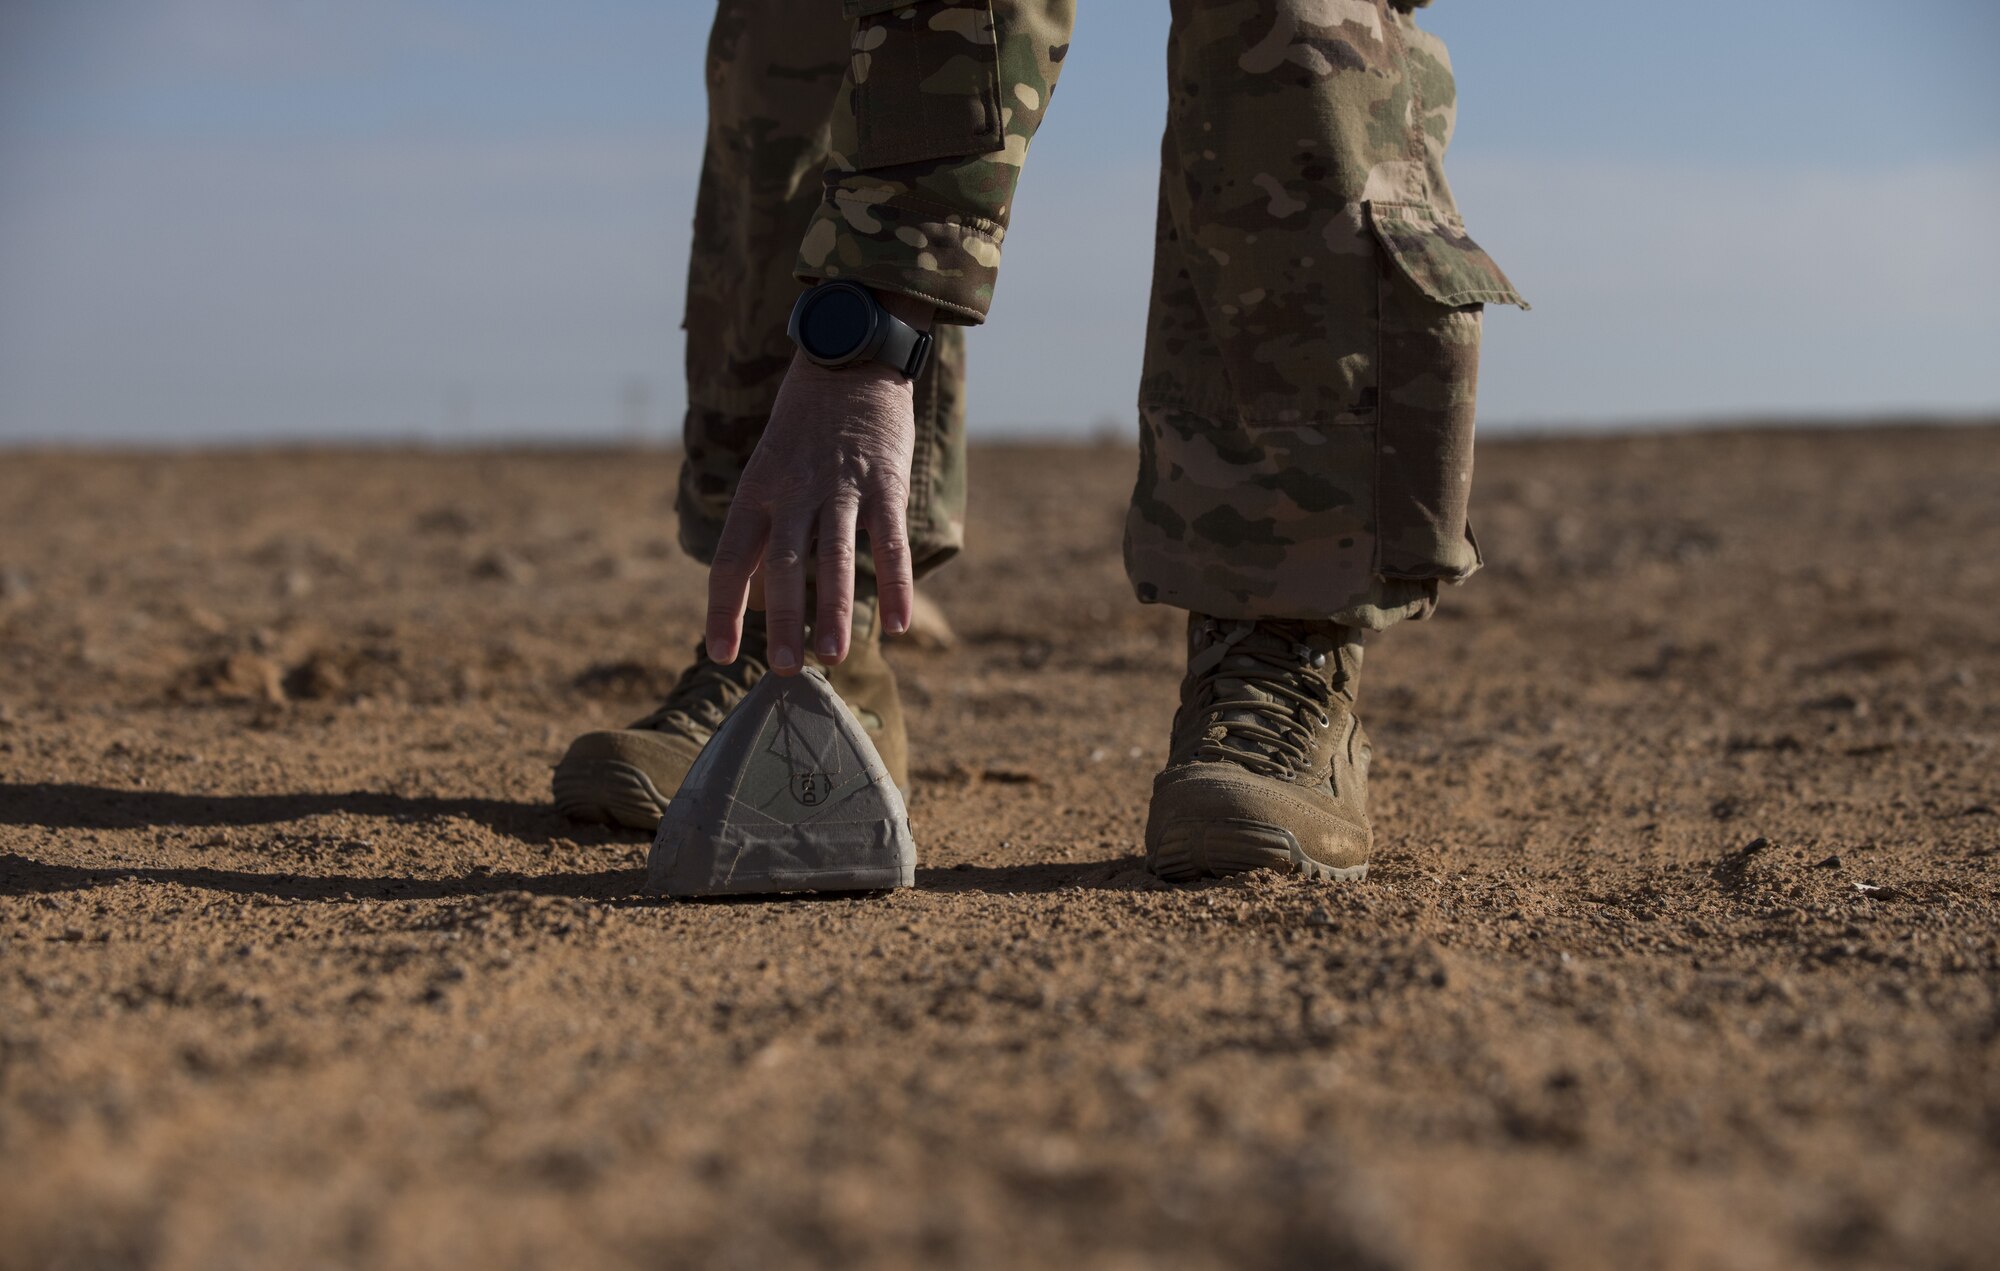 Staff Sgt. Zachary Green, assigned to the 332d Expeditionary Security Forces Squadron, recovers the nose portion a Raven B Digital Data Link drone via remote control after a demonstration Jan. 24, 2018 in Southwest Asia. Because it’s intended for use in austere locations, the Raven B is designed to break apart into segments upon landing and can be quickly and easily re-assembled. (U.S. Air Force photo by Staff Sgt. Joshua Kleinholz)